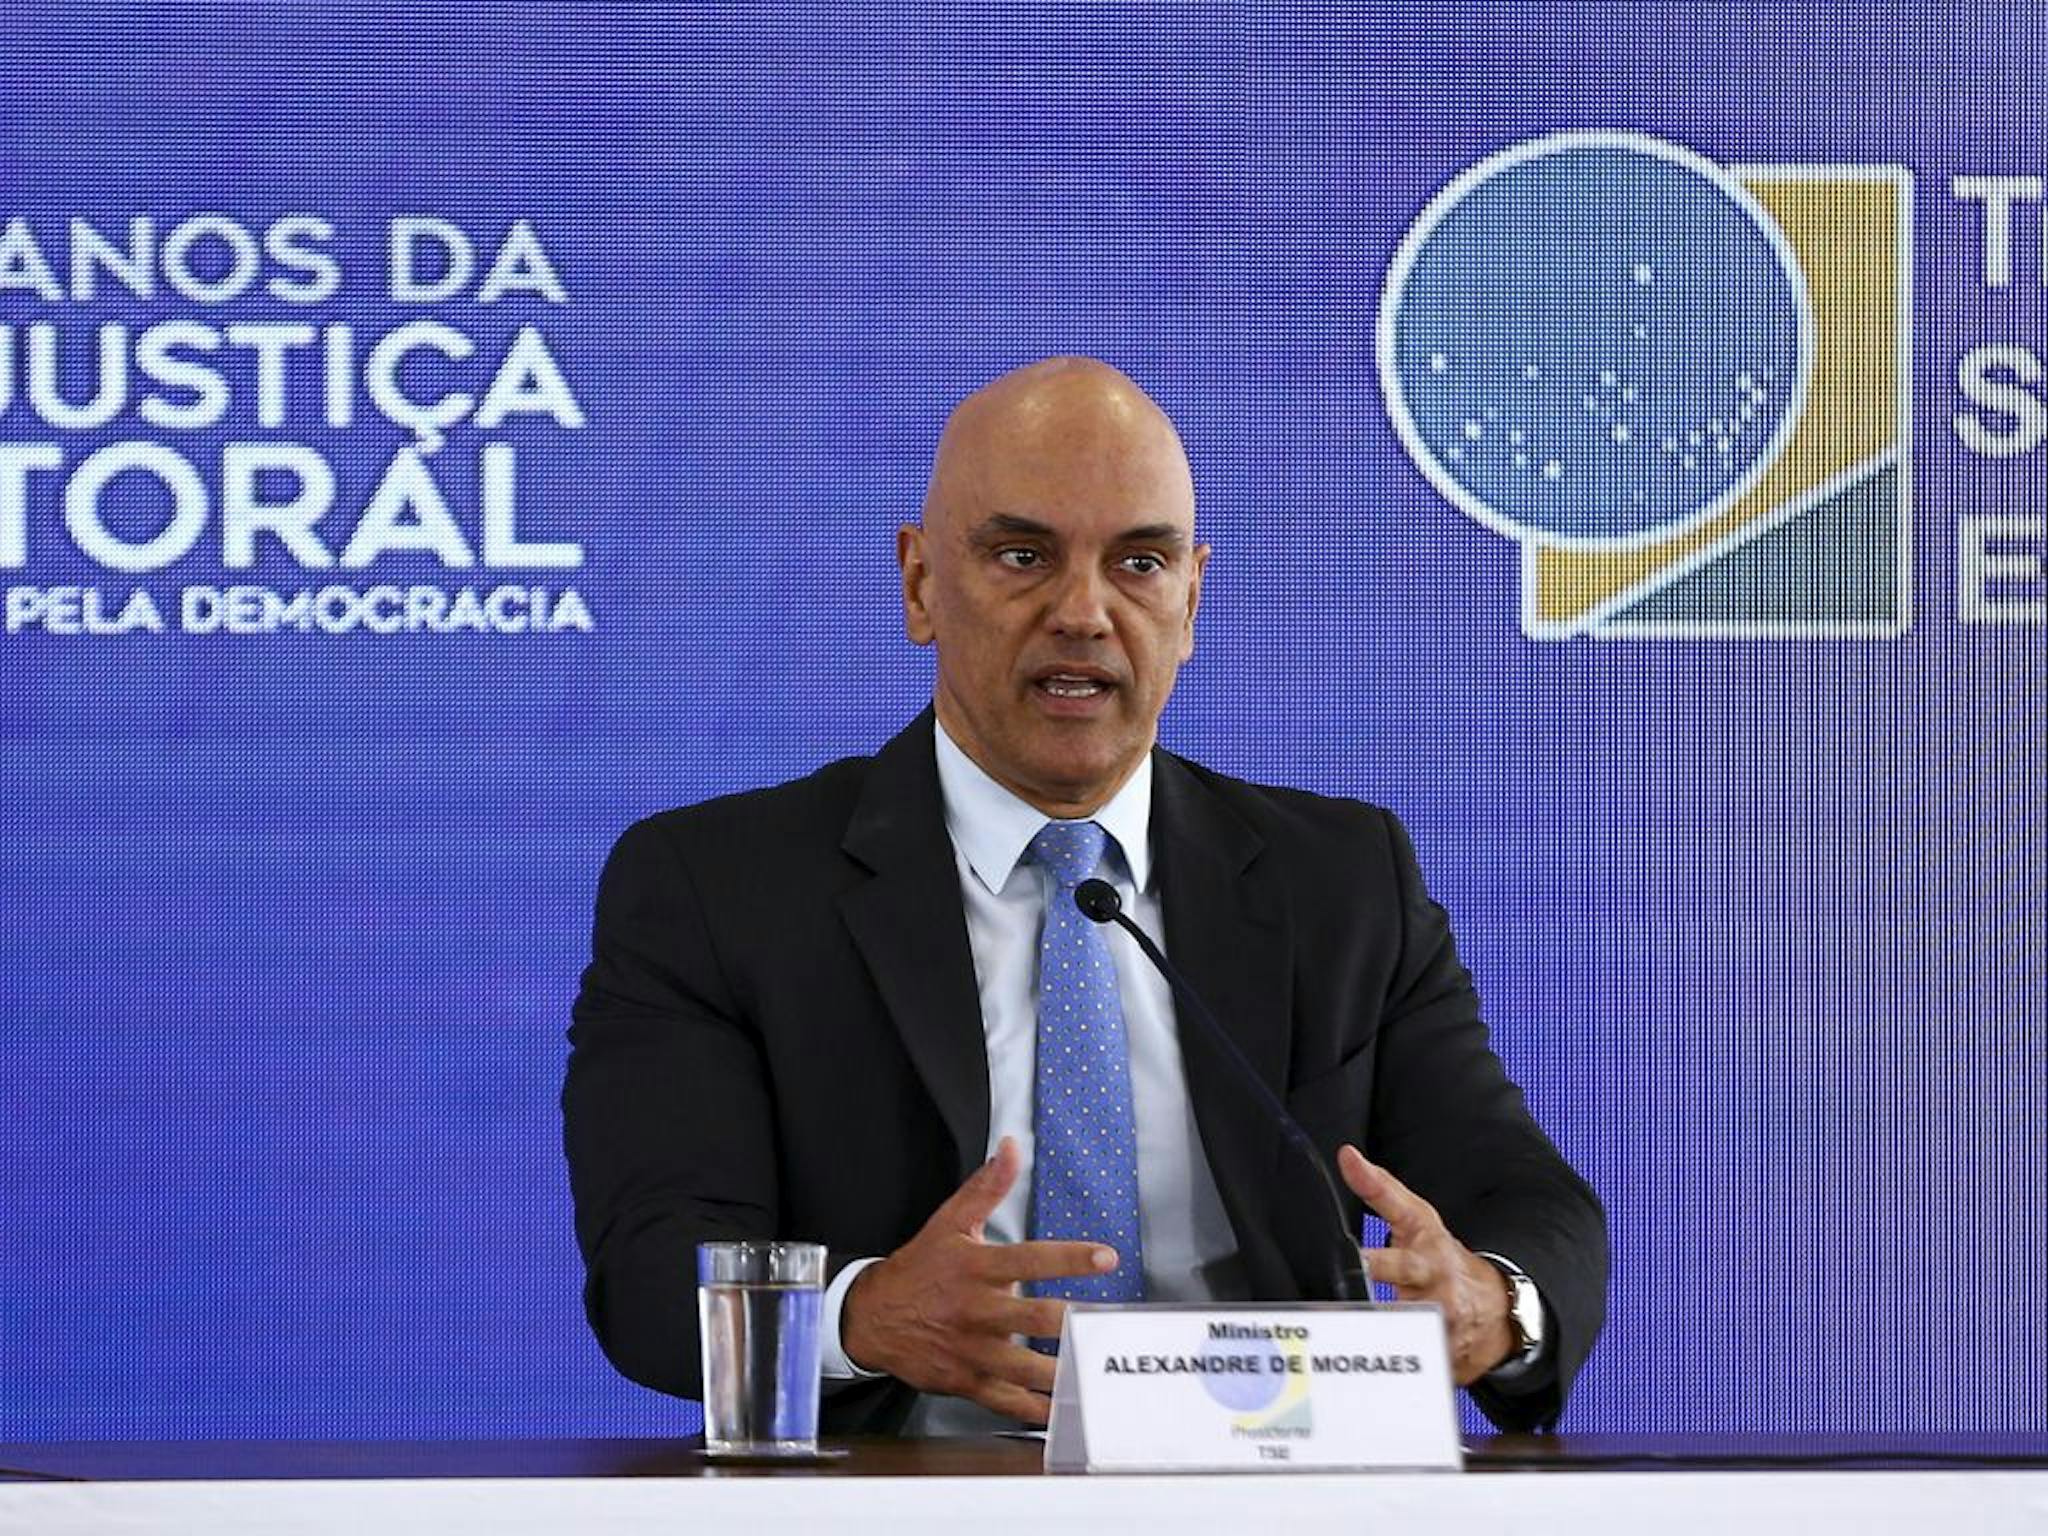 President of the Superior Electoral Court and judge of the Supreme Court Alexandre de Moraes. Image courtesy of TSE